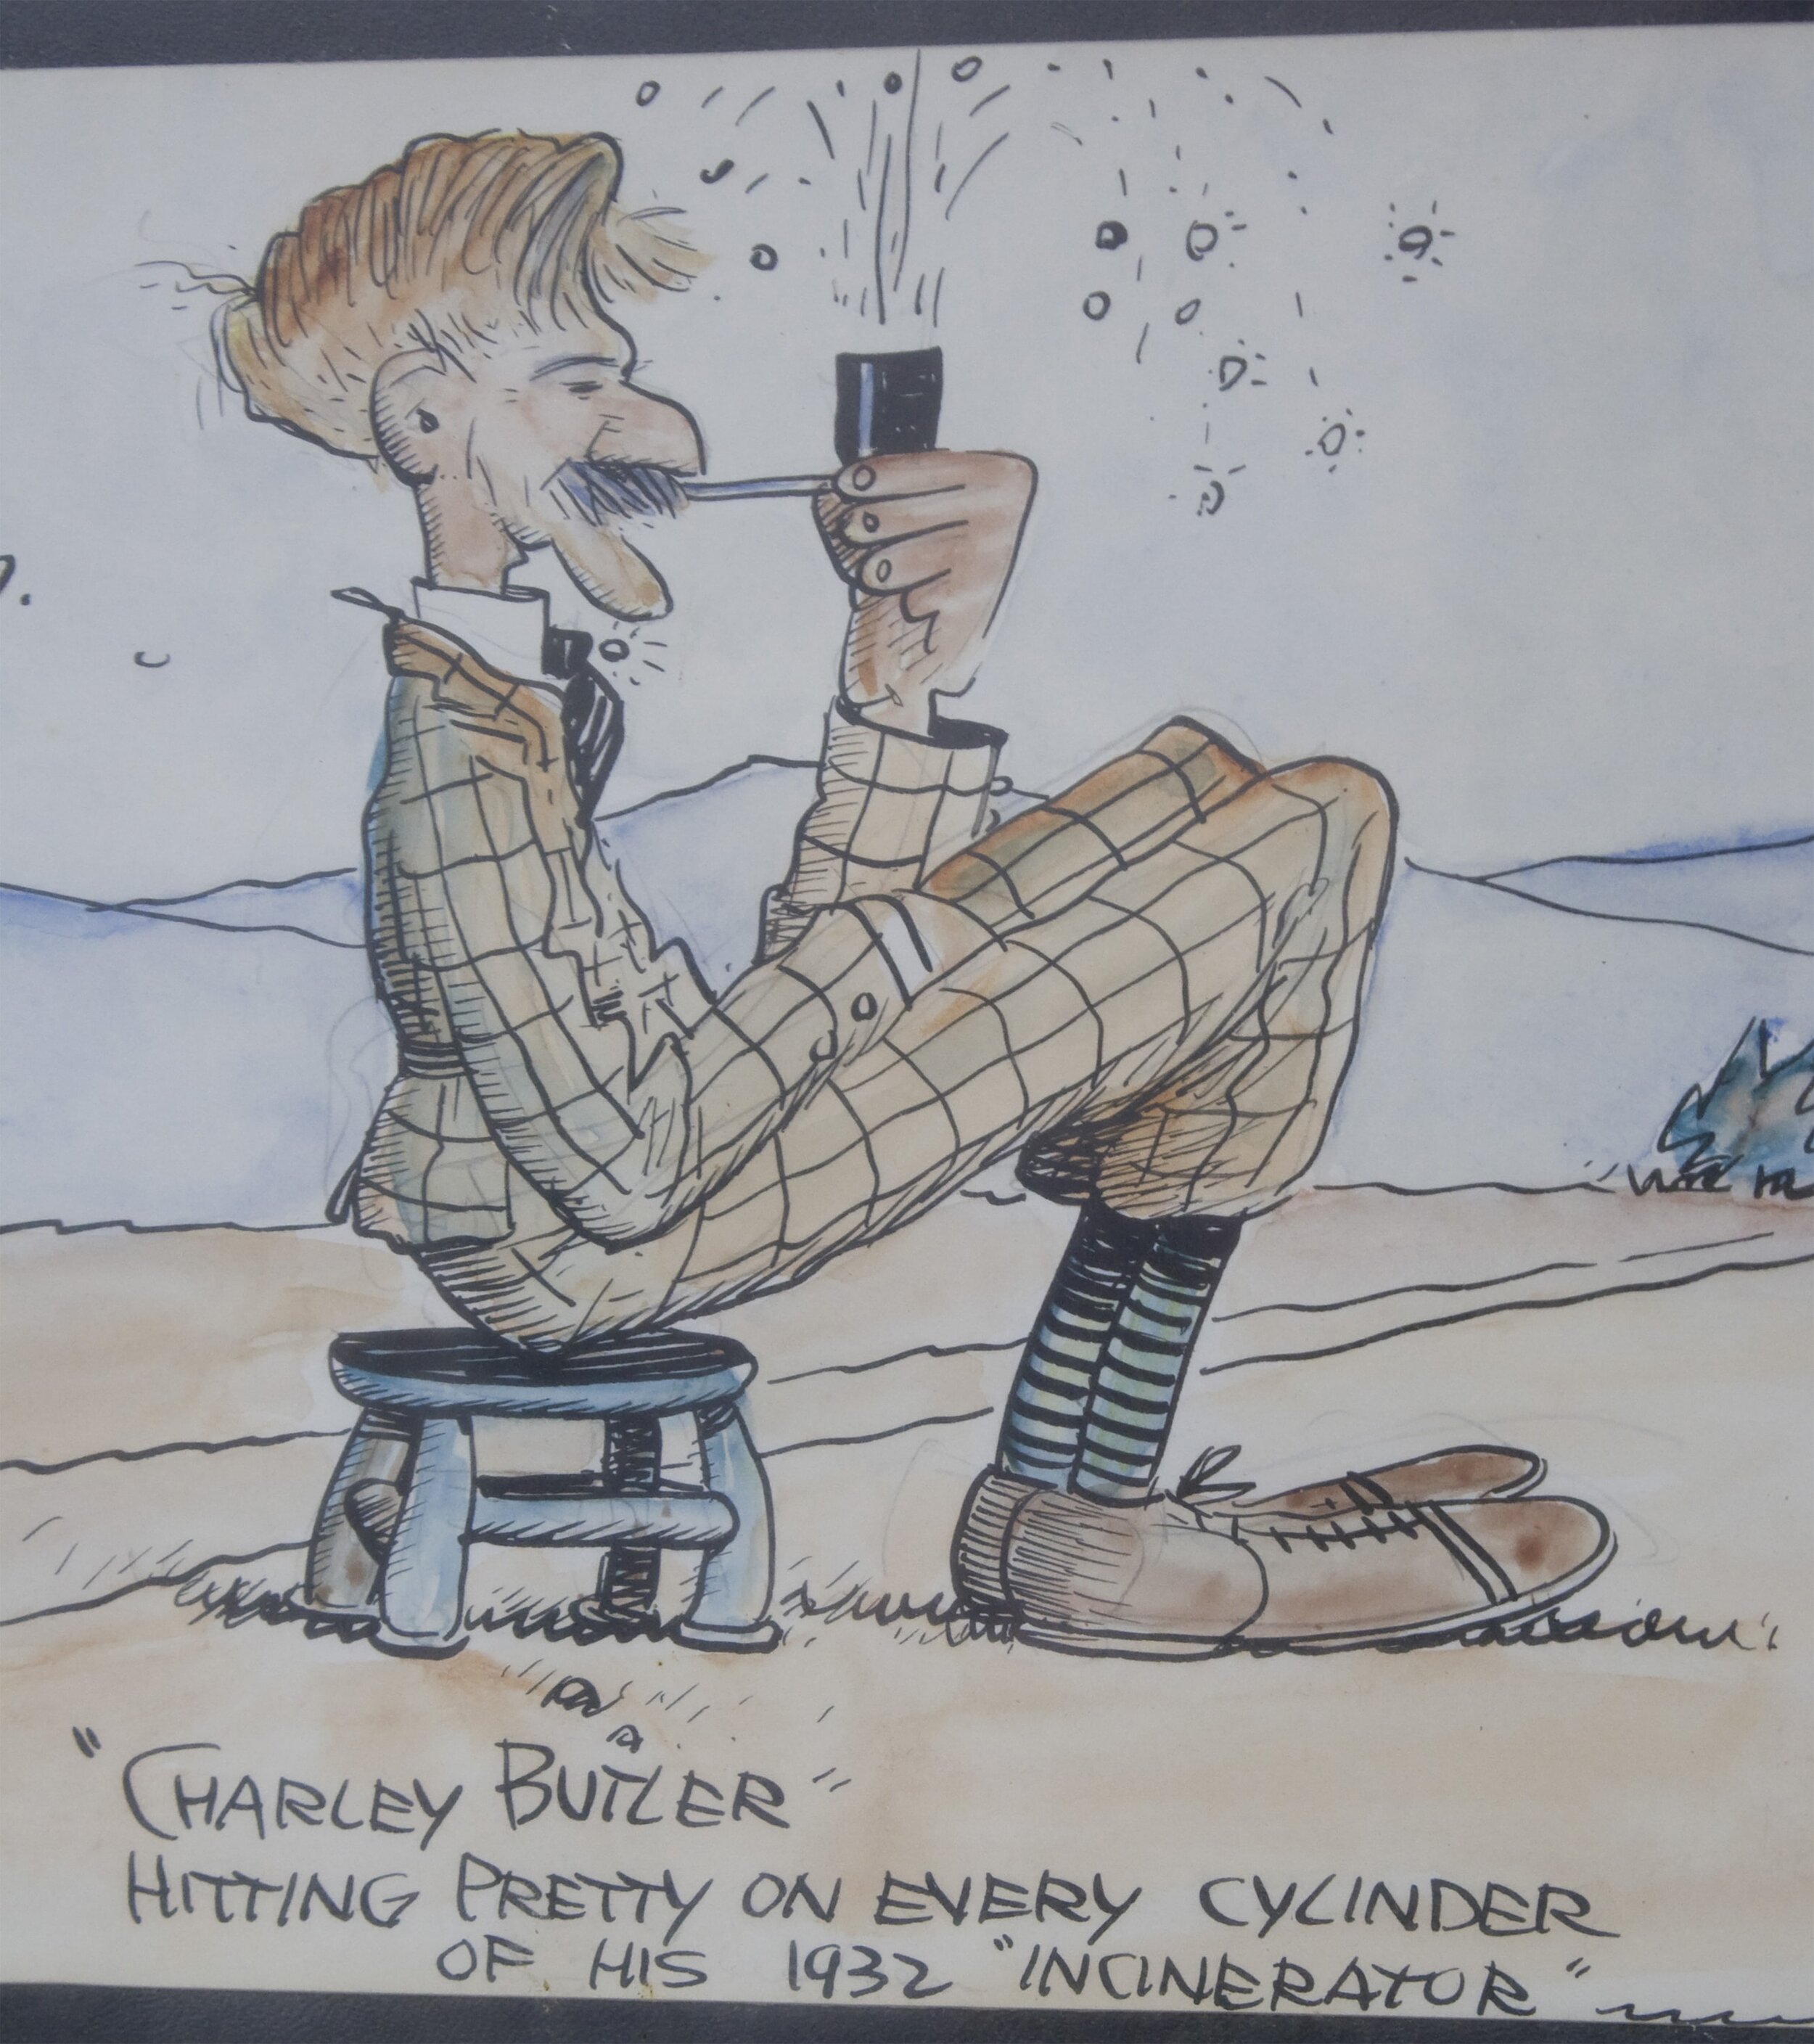 21-1932-charley-butler-caricature-from-uplifters.jpg